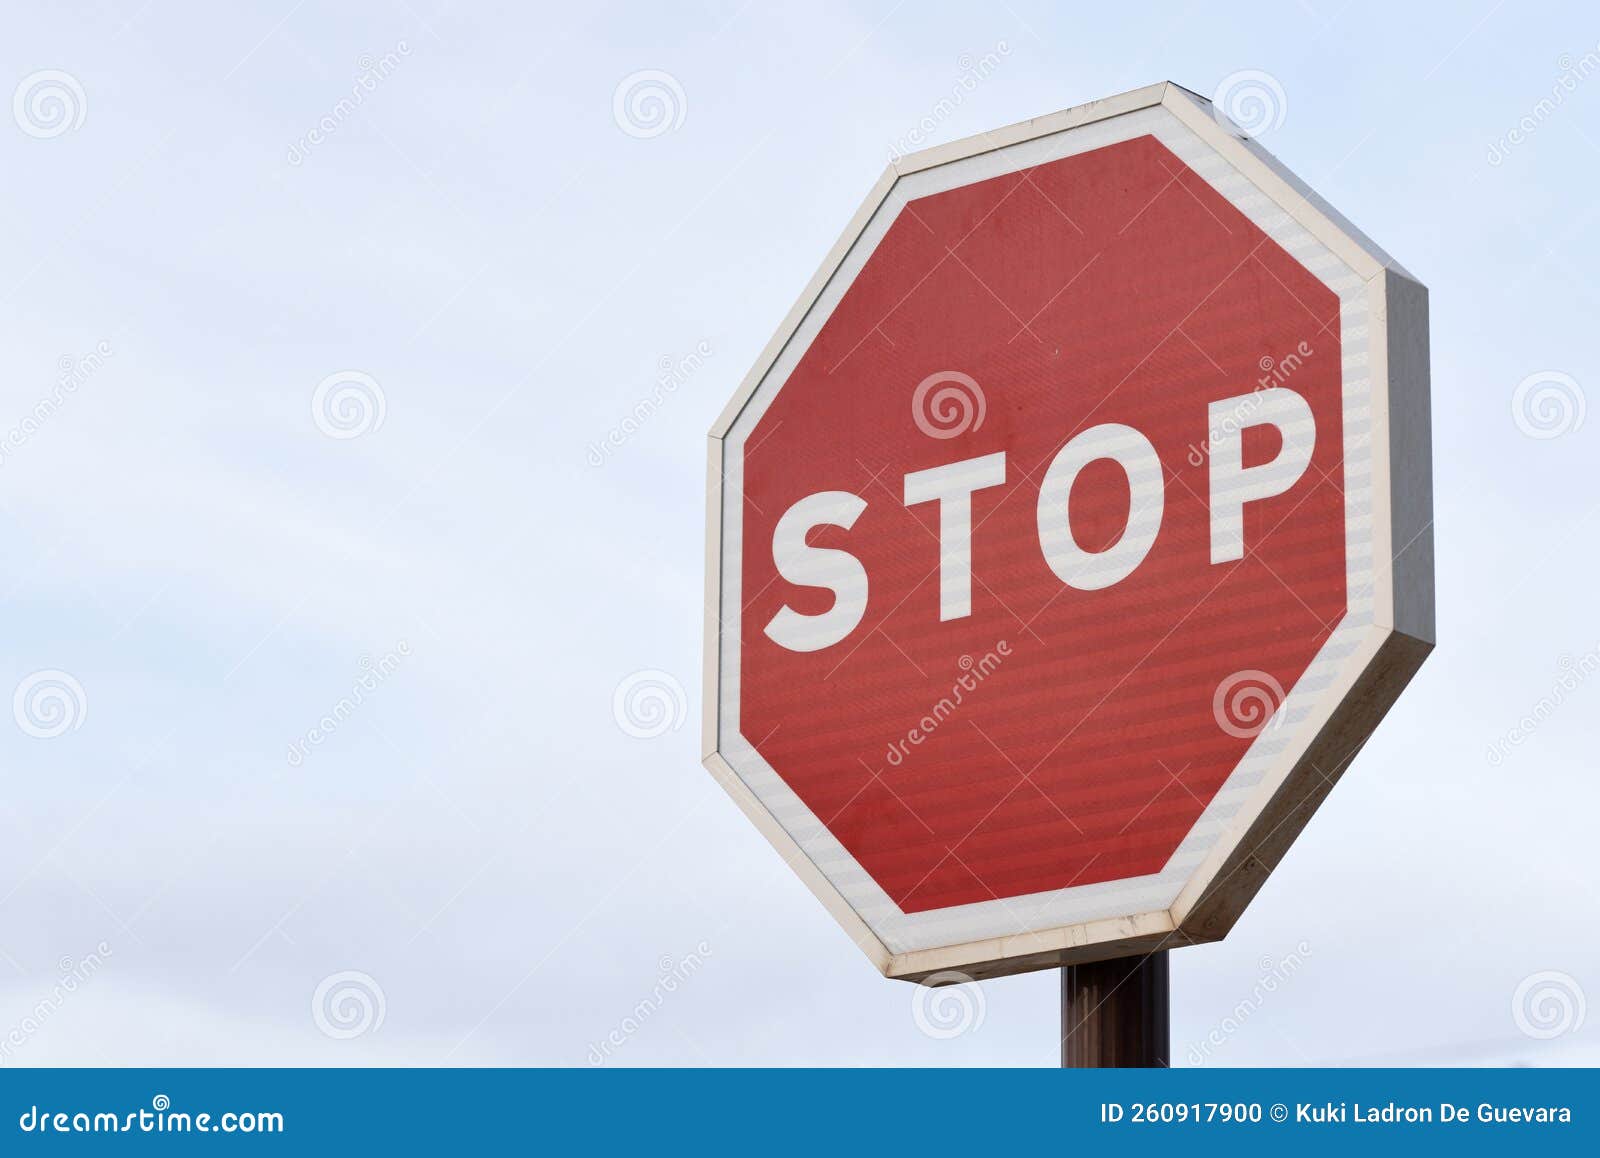 stop sign on a street